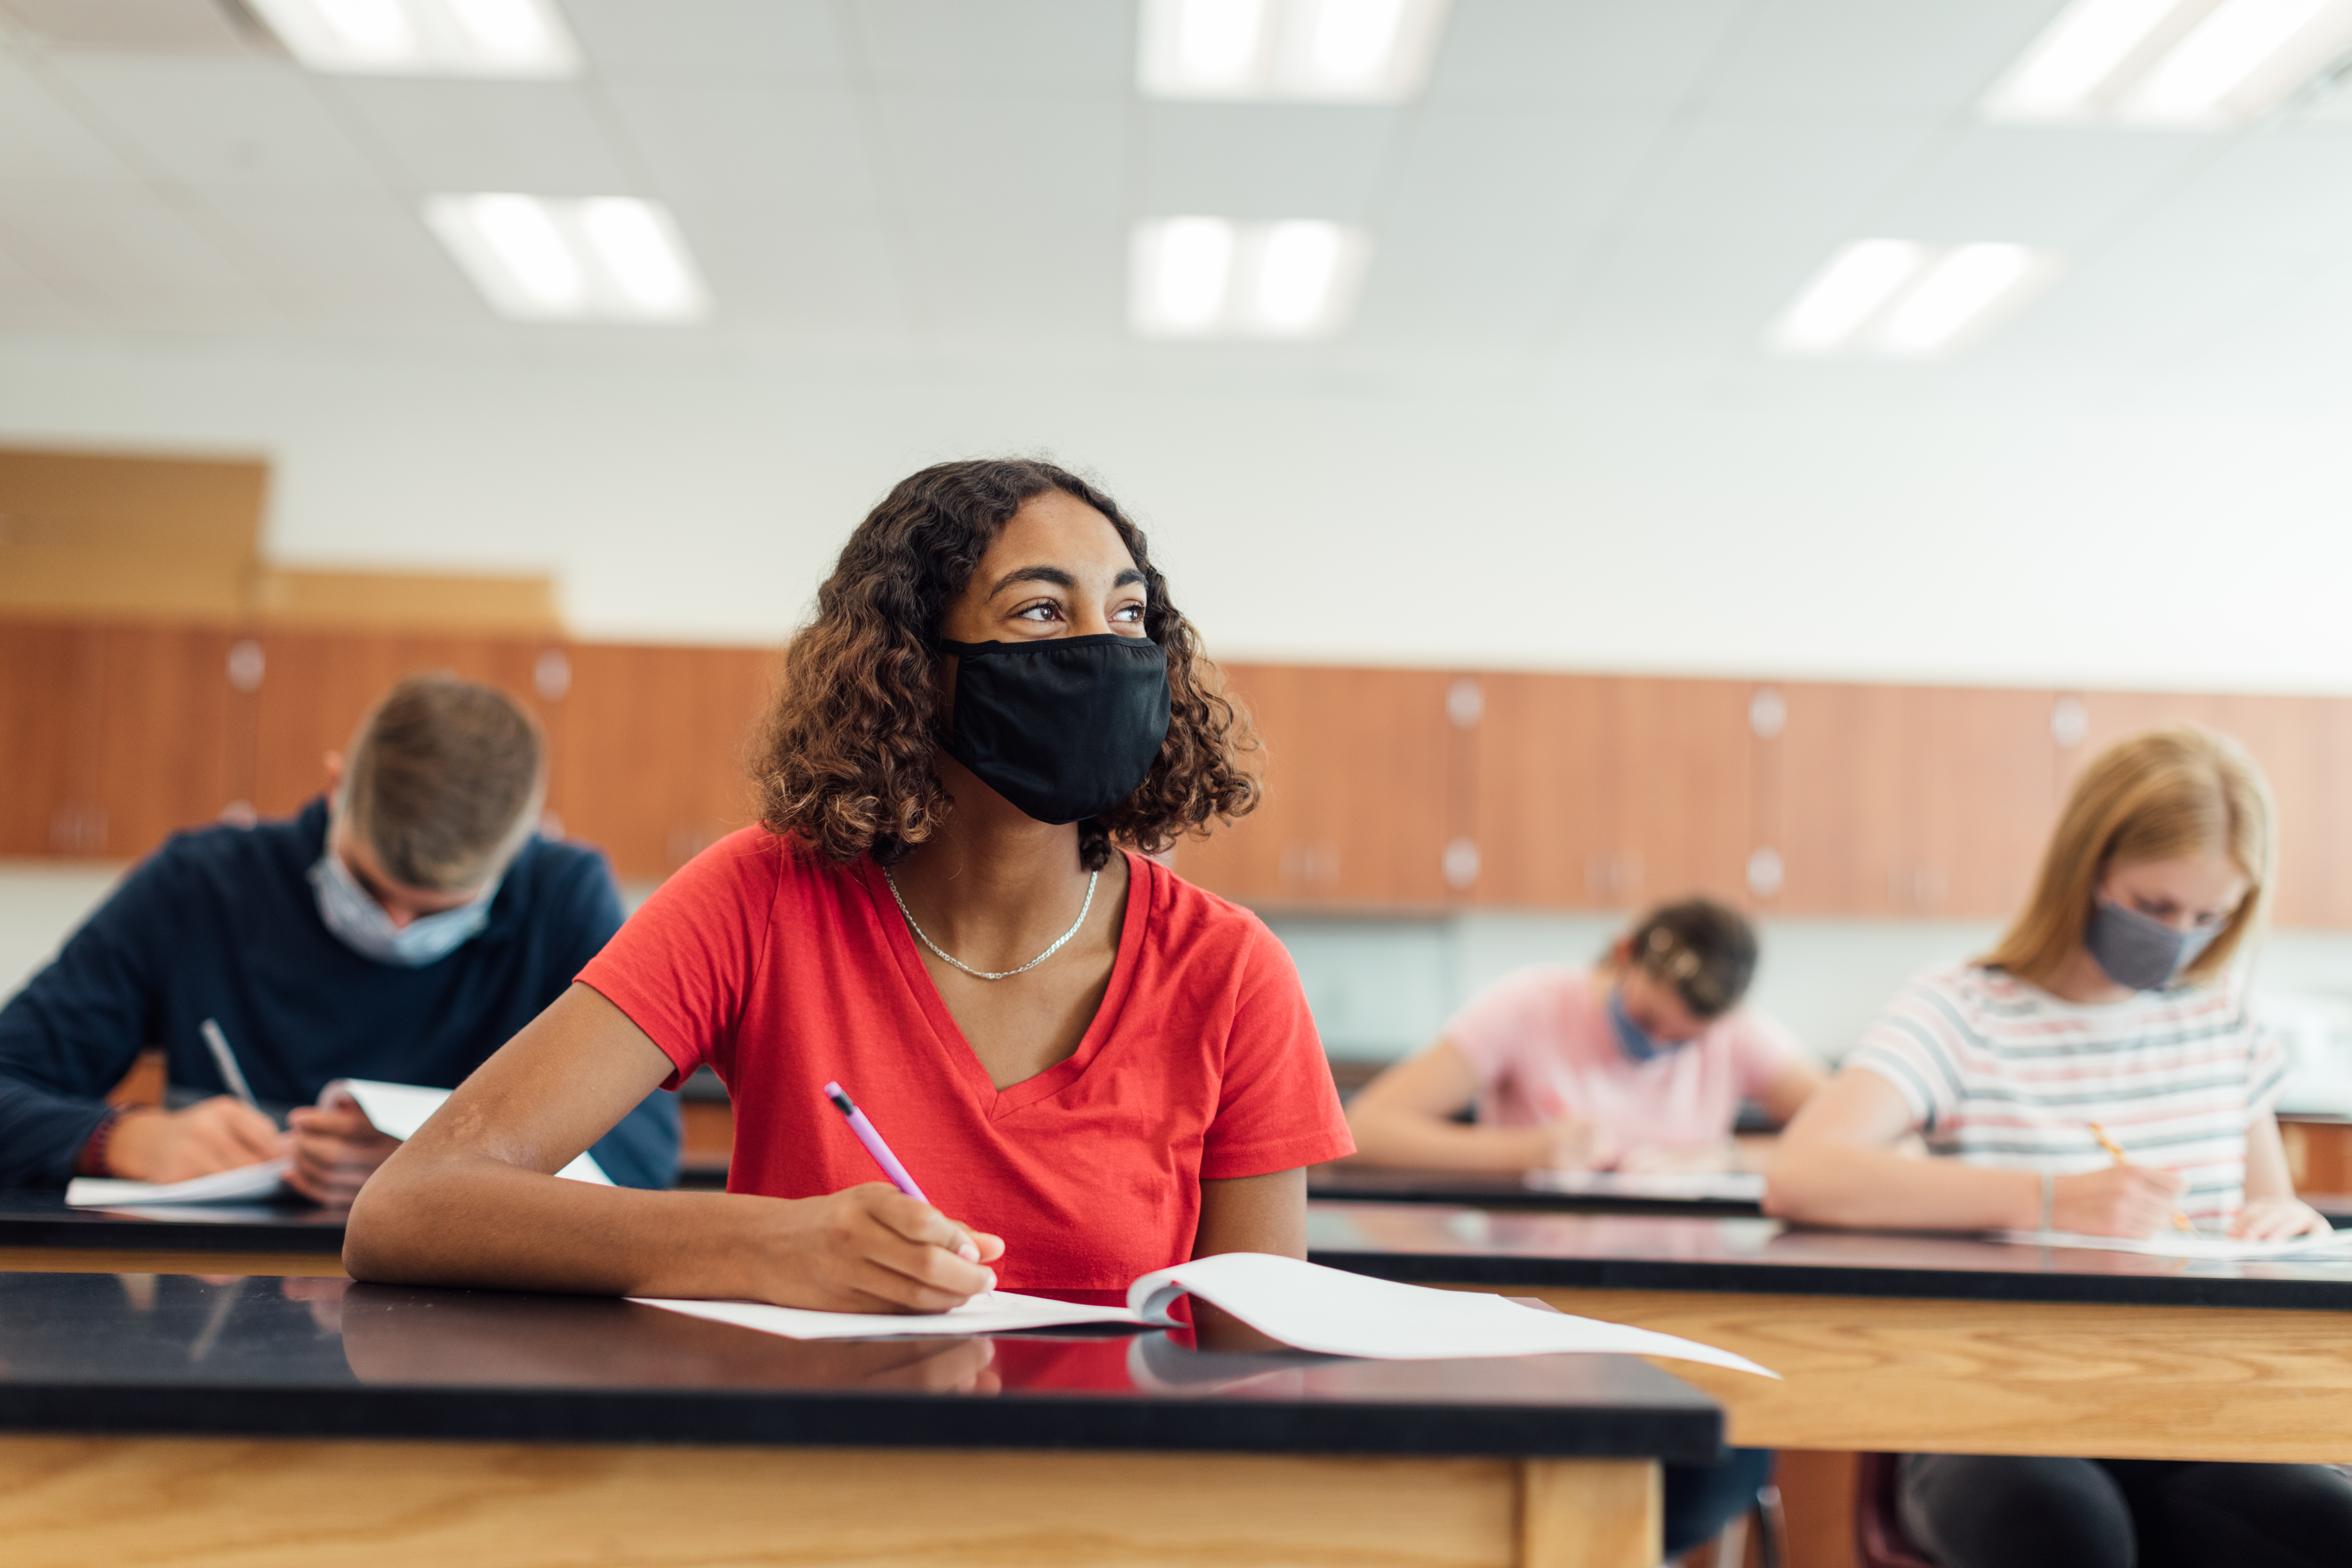 Applicants take a multiple choice test while wearing masks and practicing social distancing.